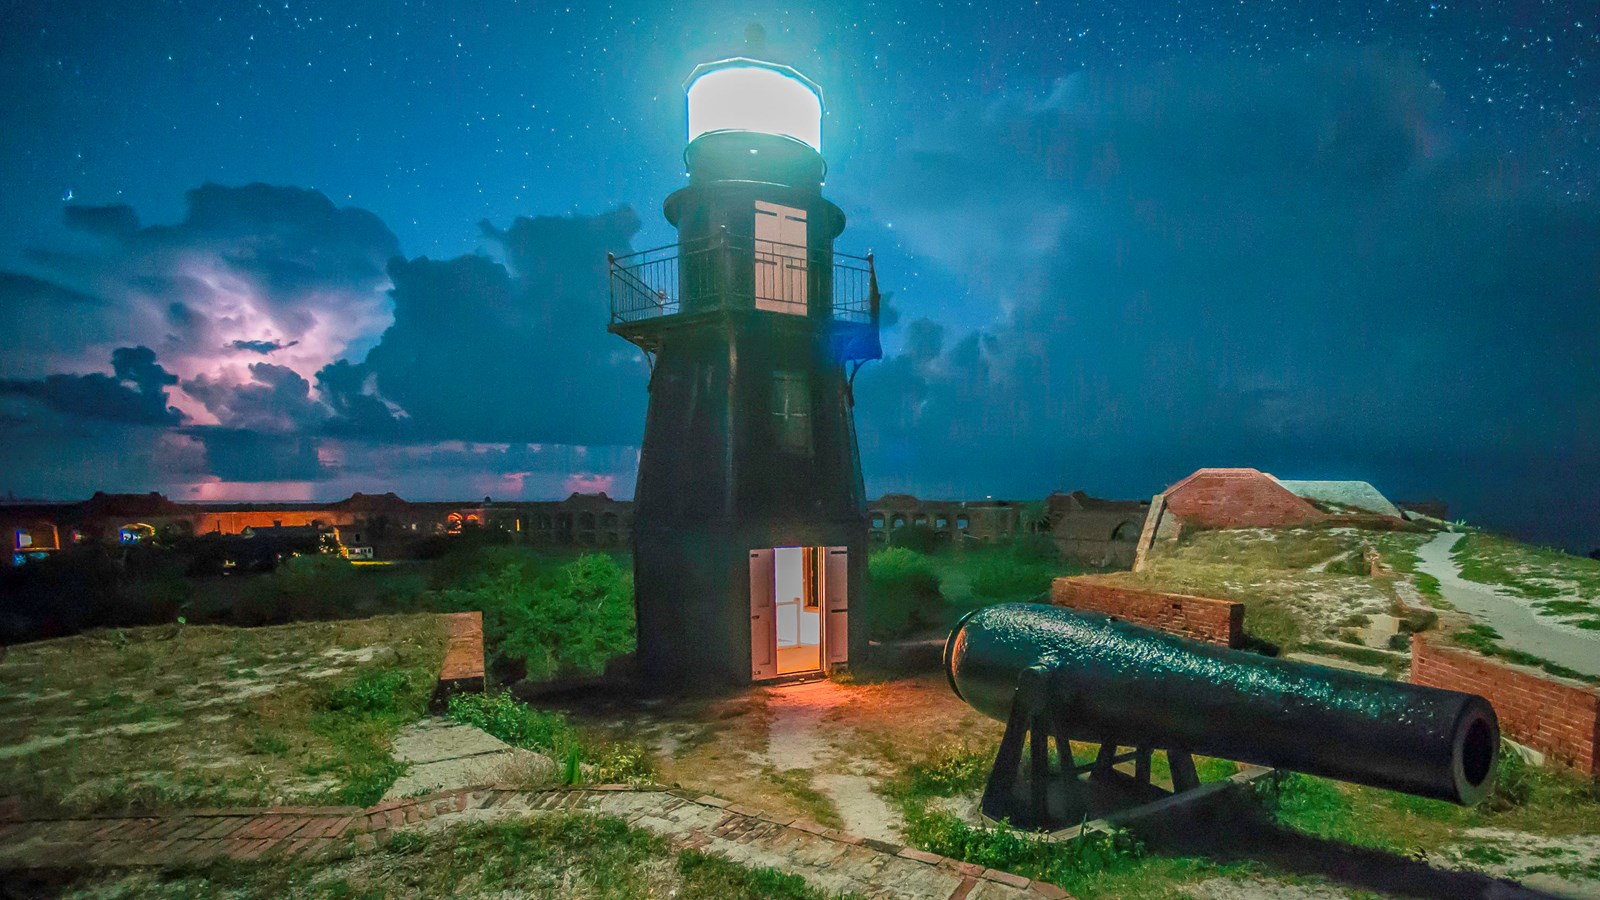 A night time view of the illuminated historic Tortugas Harbor Light with nearby parrot rifle cannon.